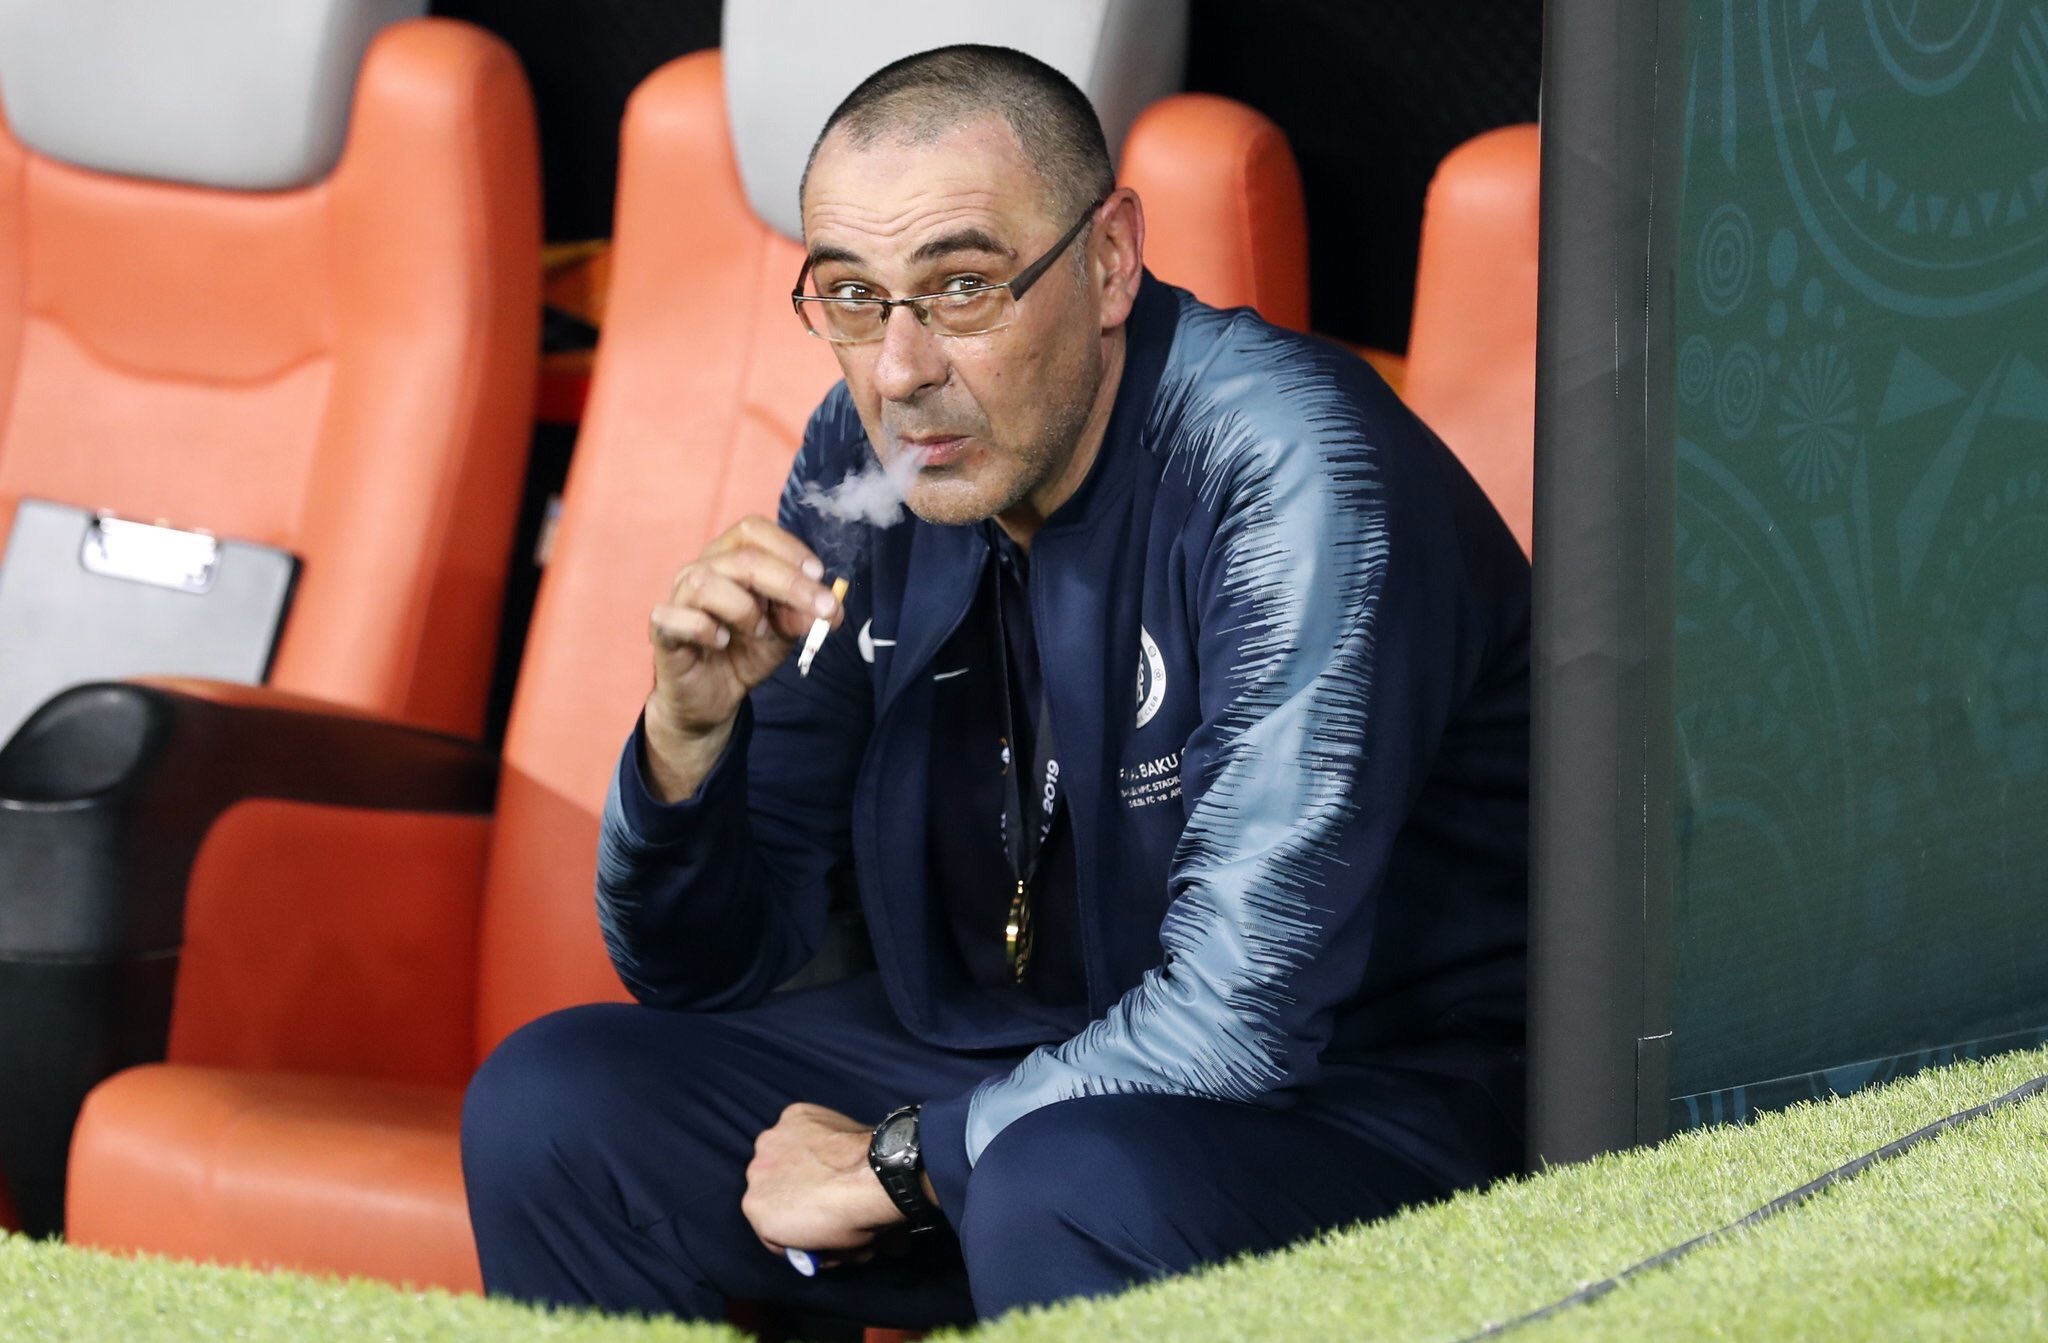 Chelsea reject Sarri’s offer to remain and agree to Juventus move